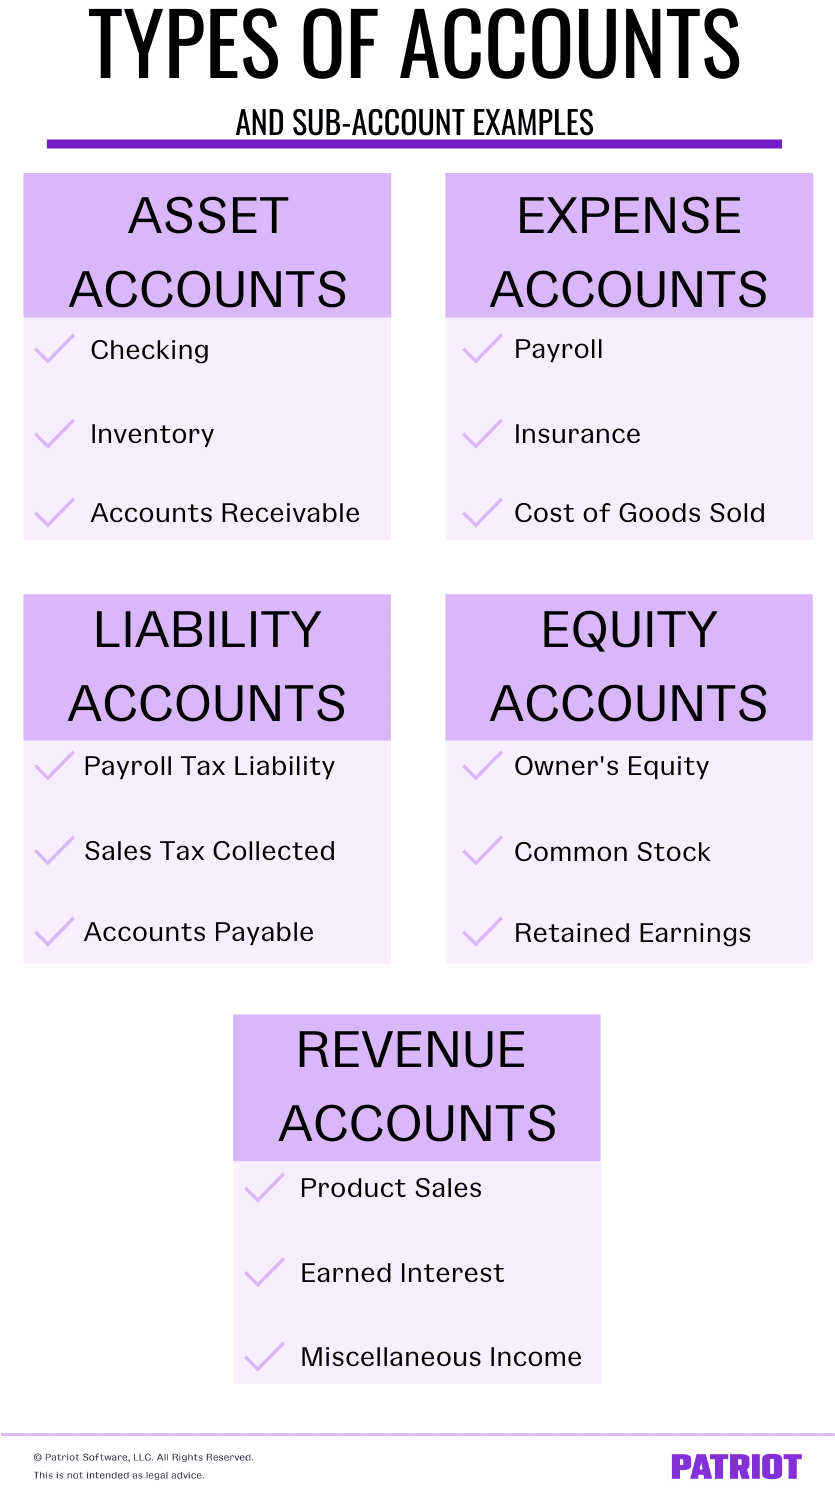 account assignment objects in asset accounting